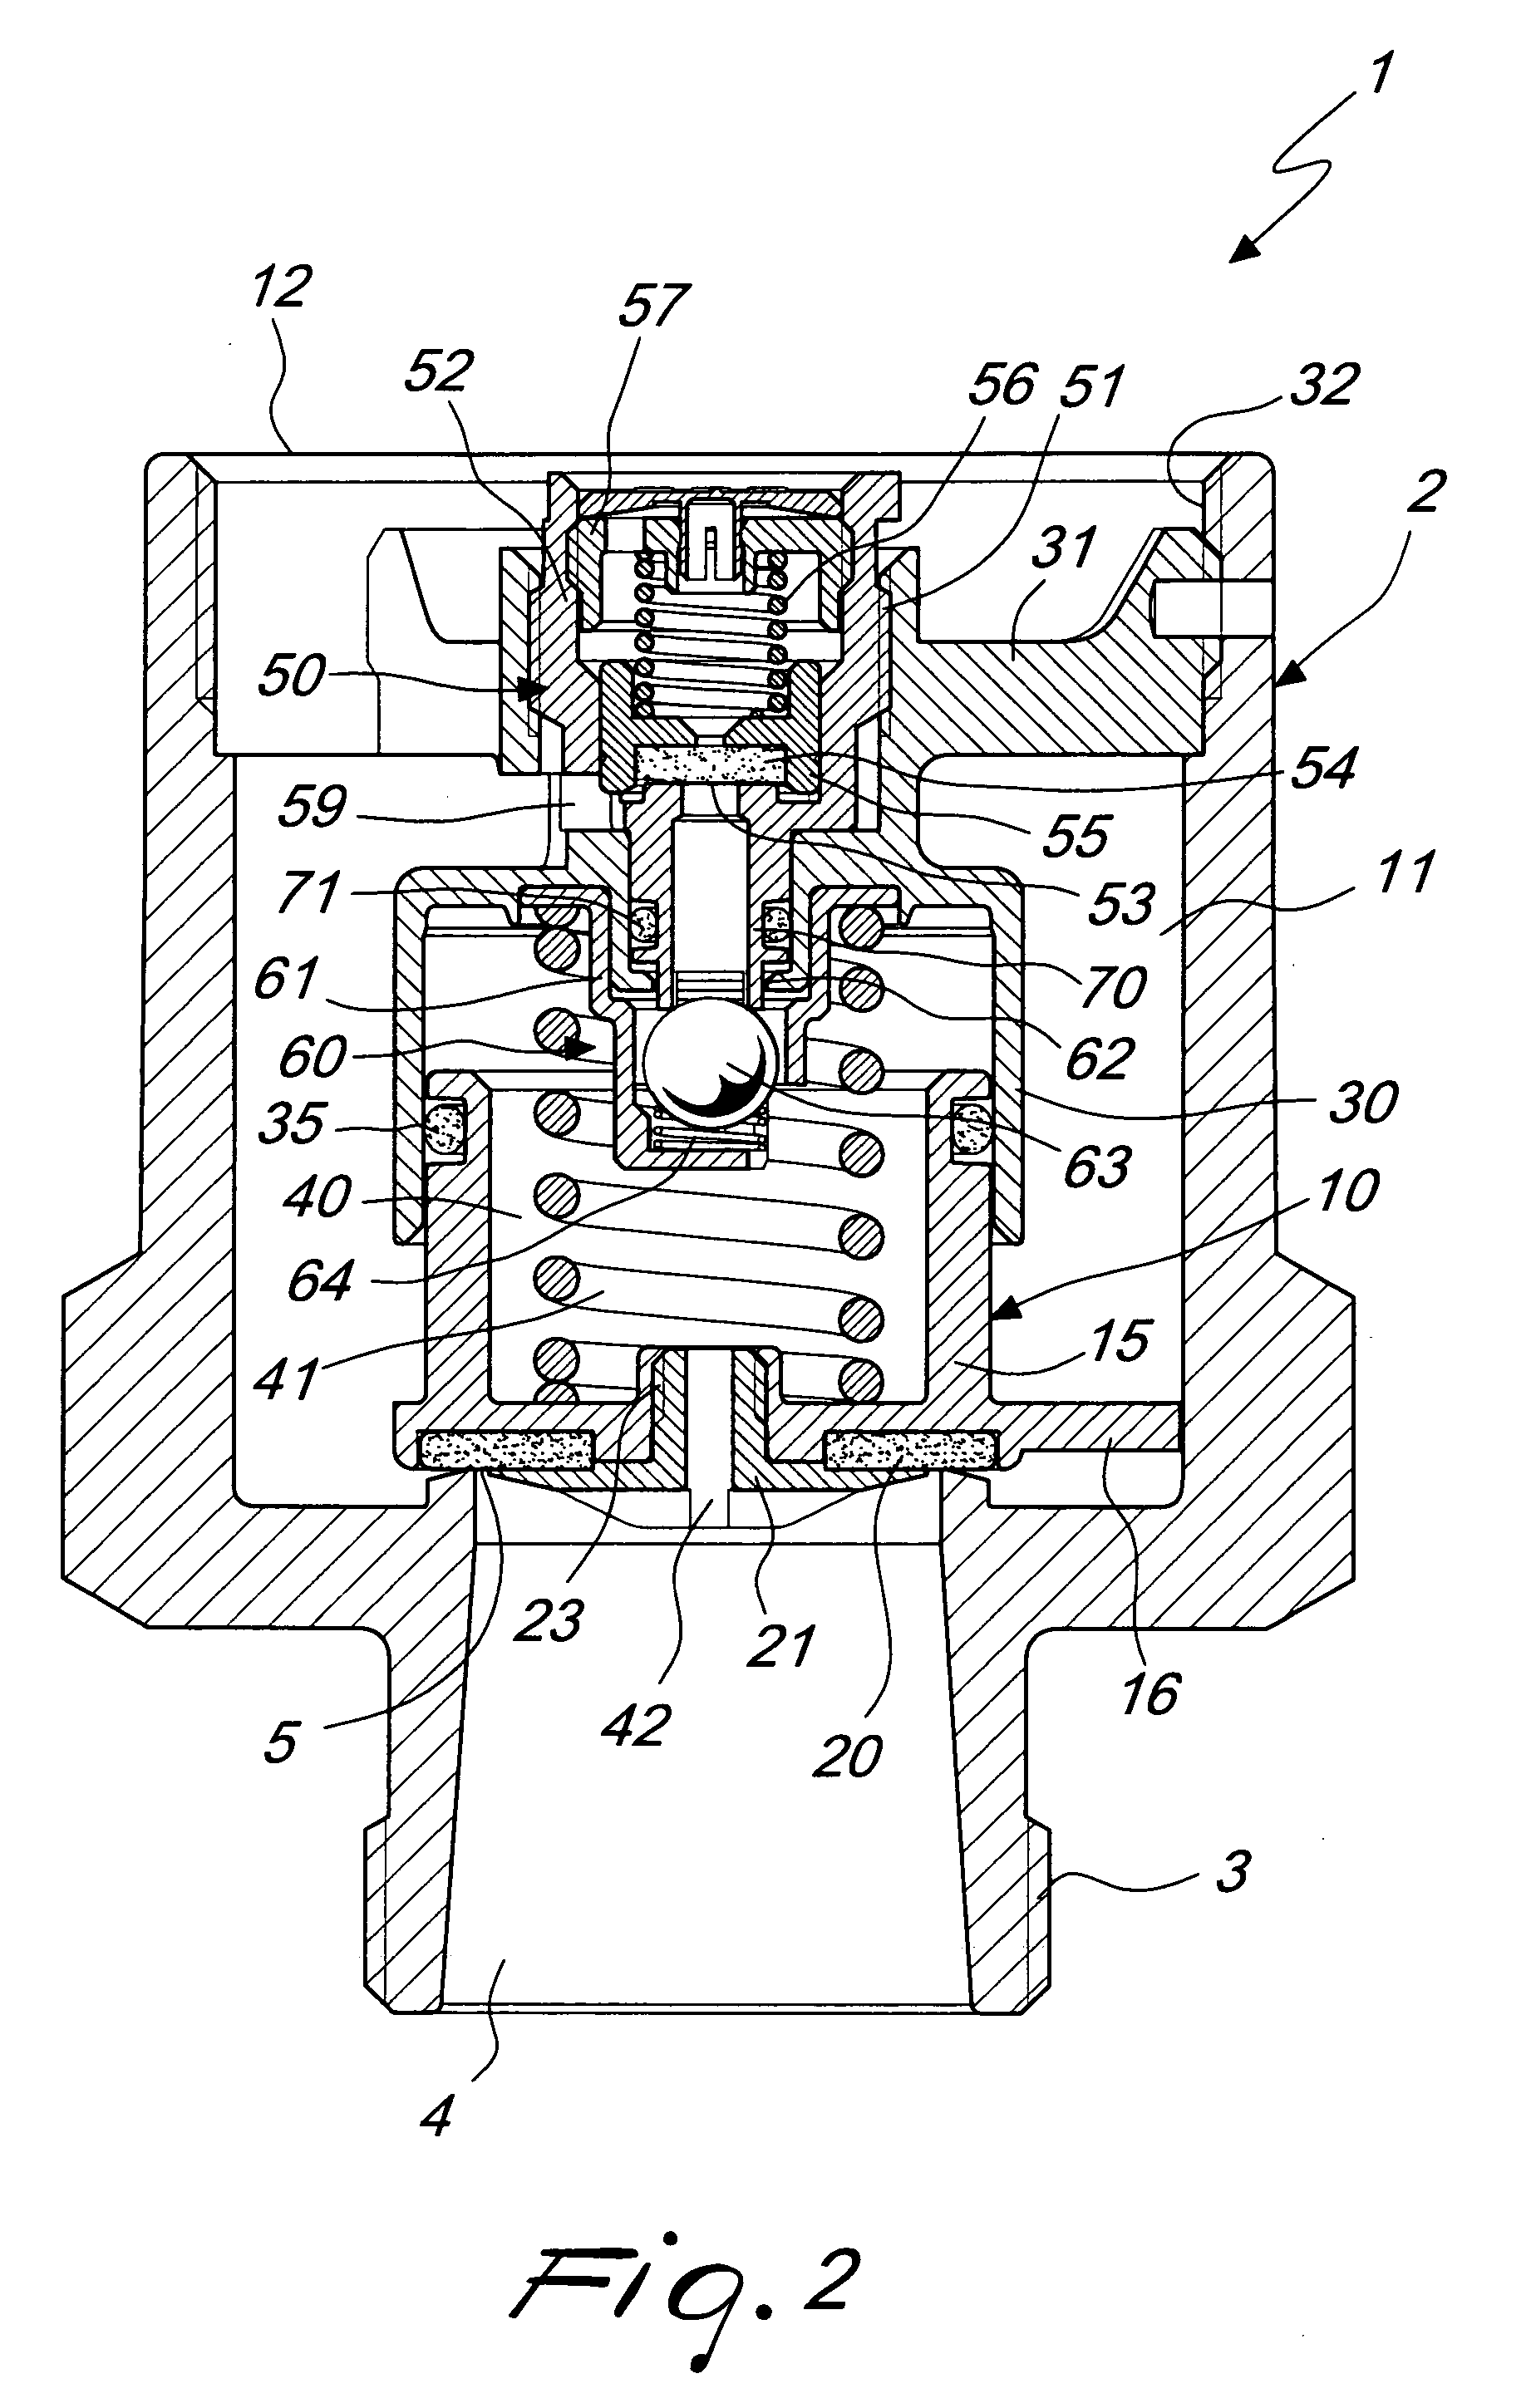 Spring-loaded pressure relief valve, particularly for containers of pressurized fluids